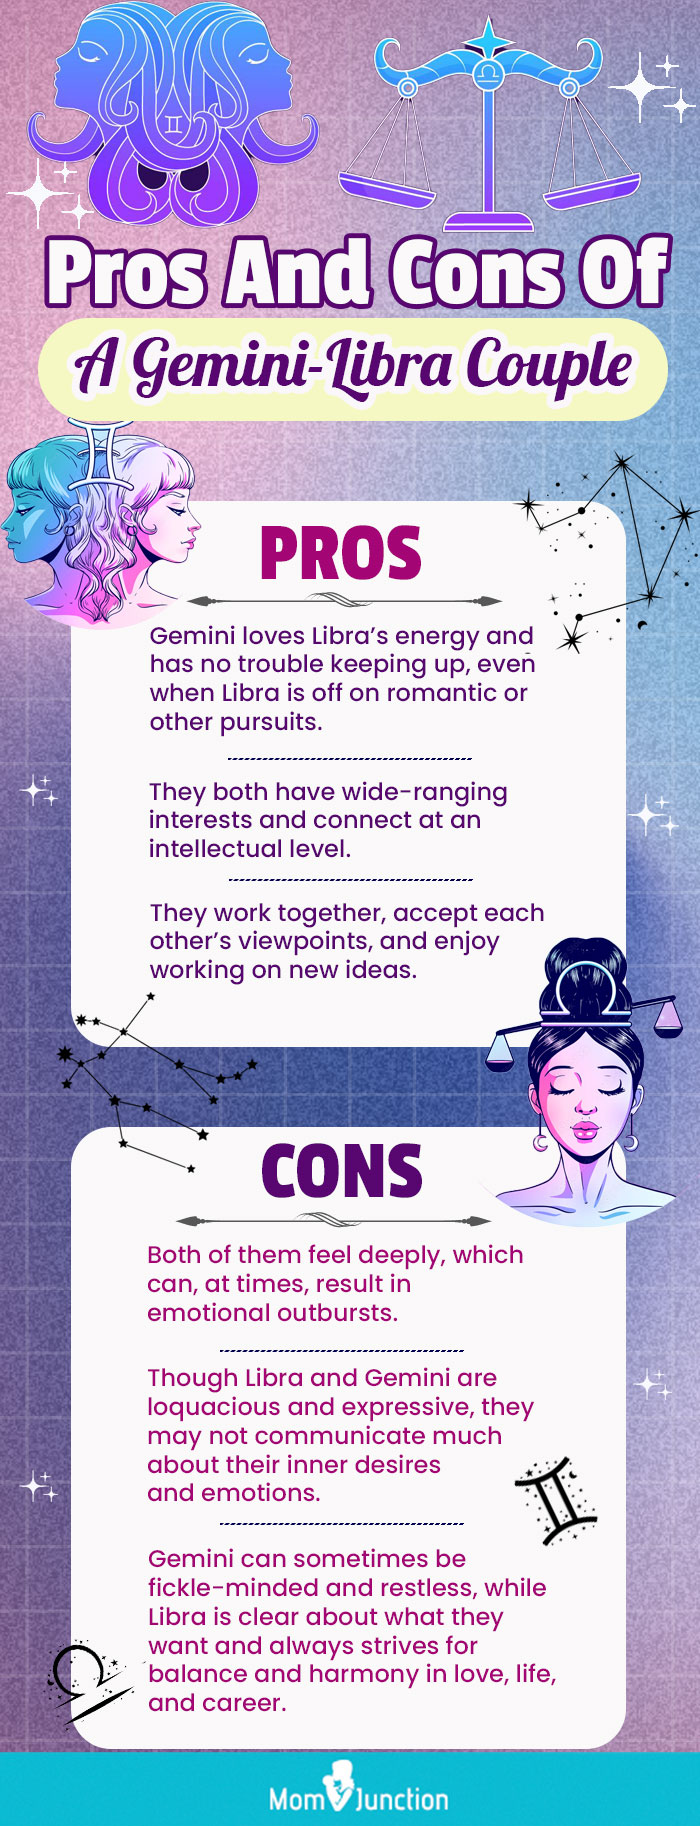 pros and cons of gemini libra (infographic)